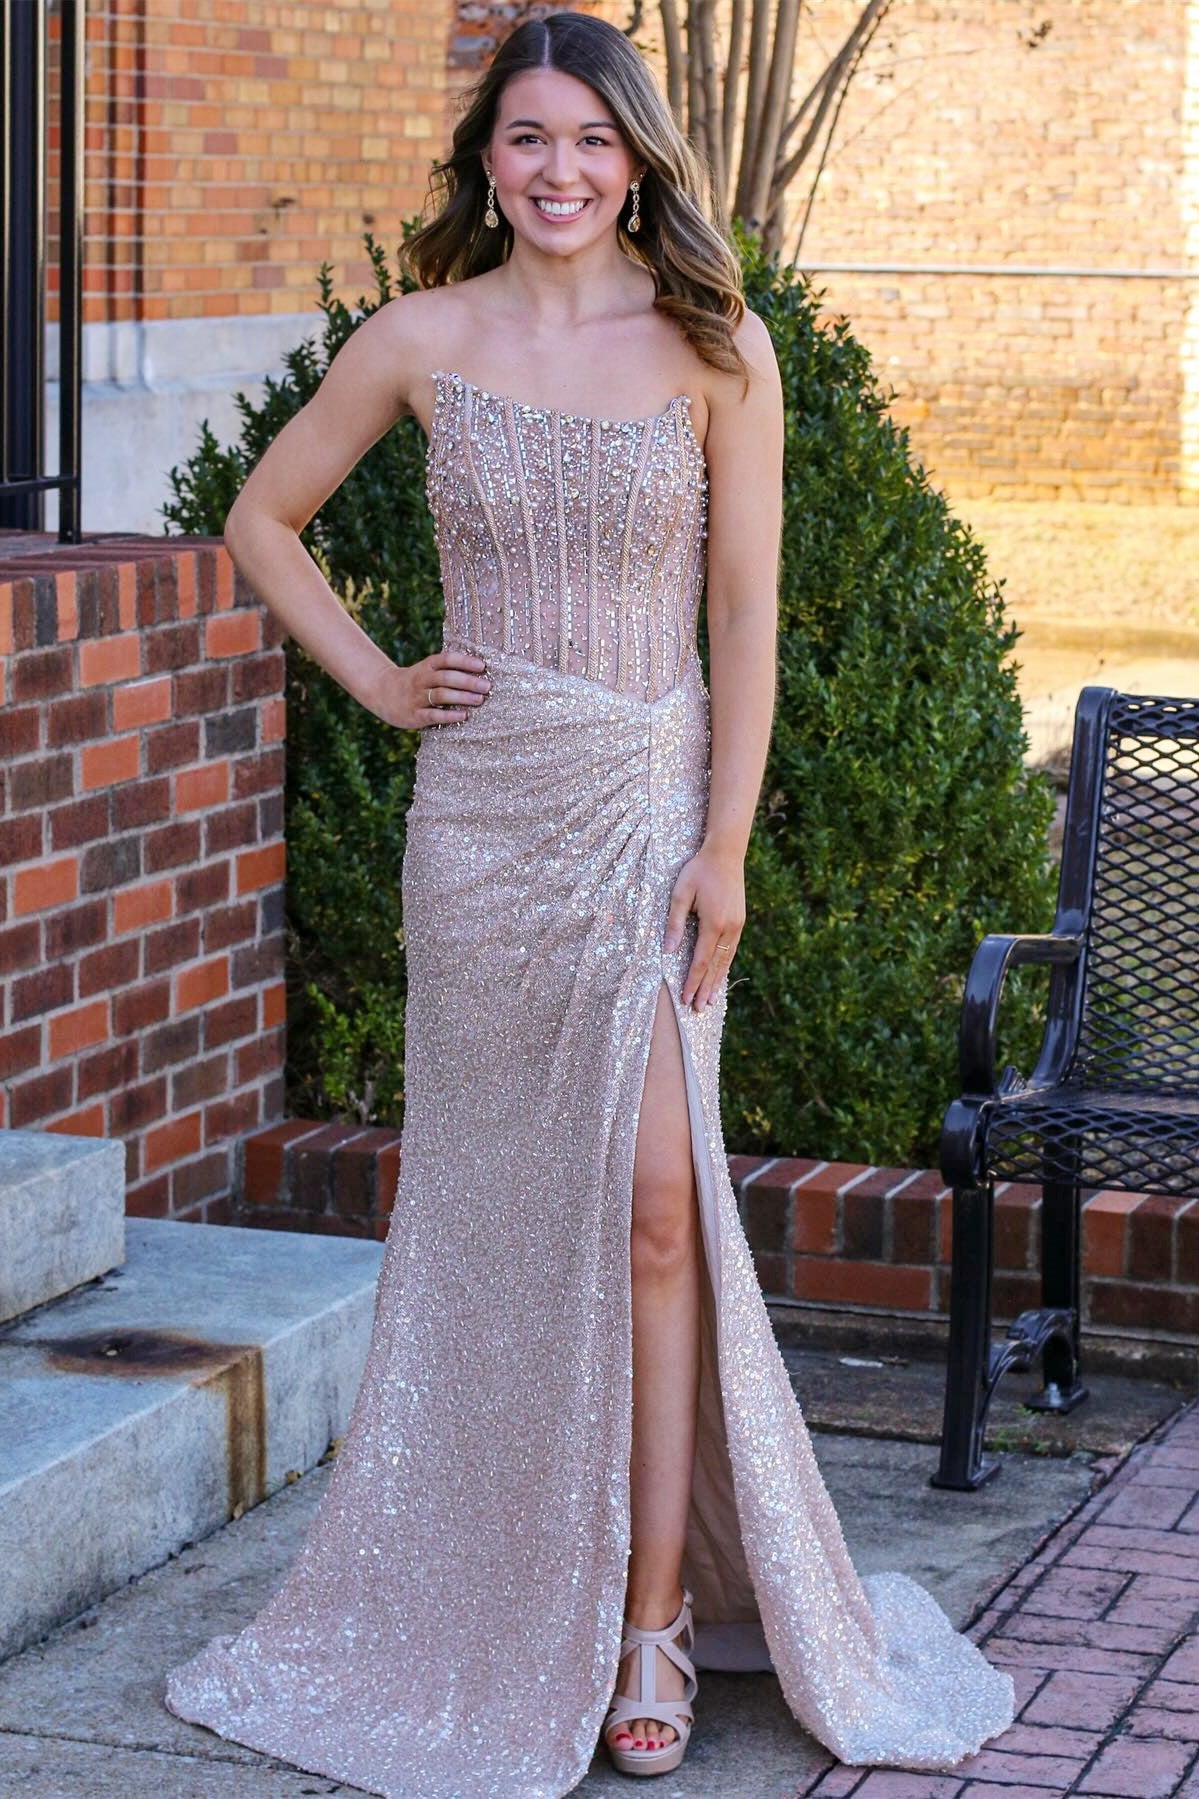 Champagne Sequin Beaded Strapless Long Prom Dress with Slit